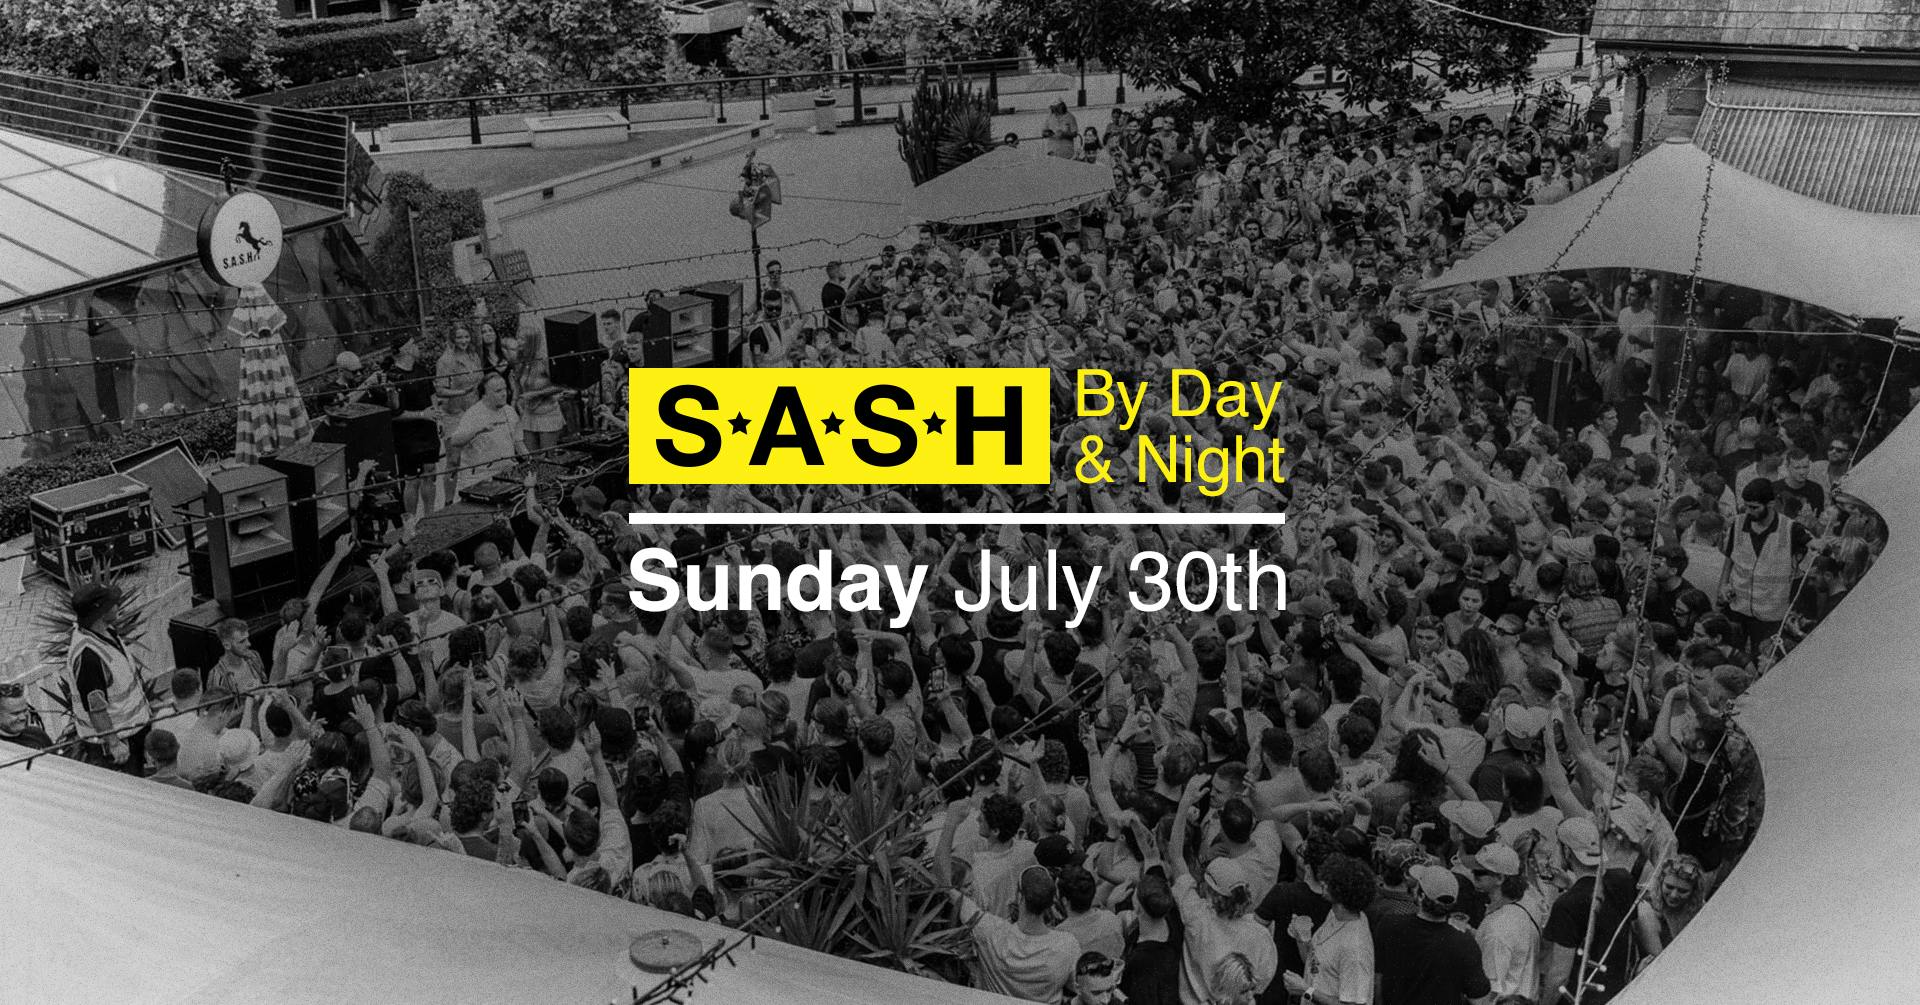 S.A.S.H By Day & Night July 30th